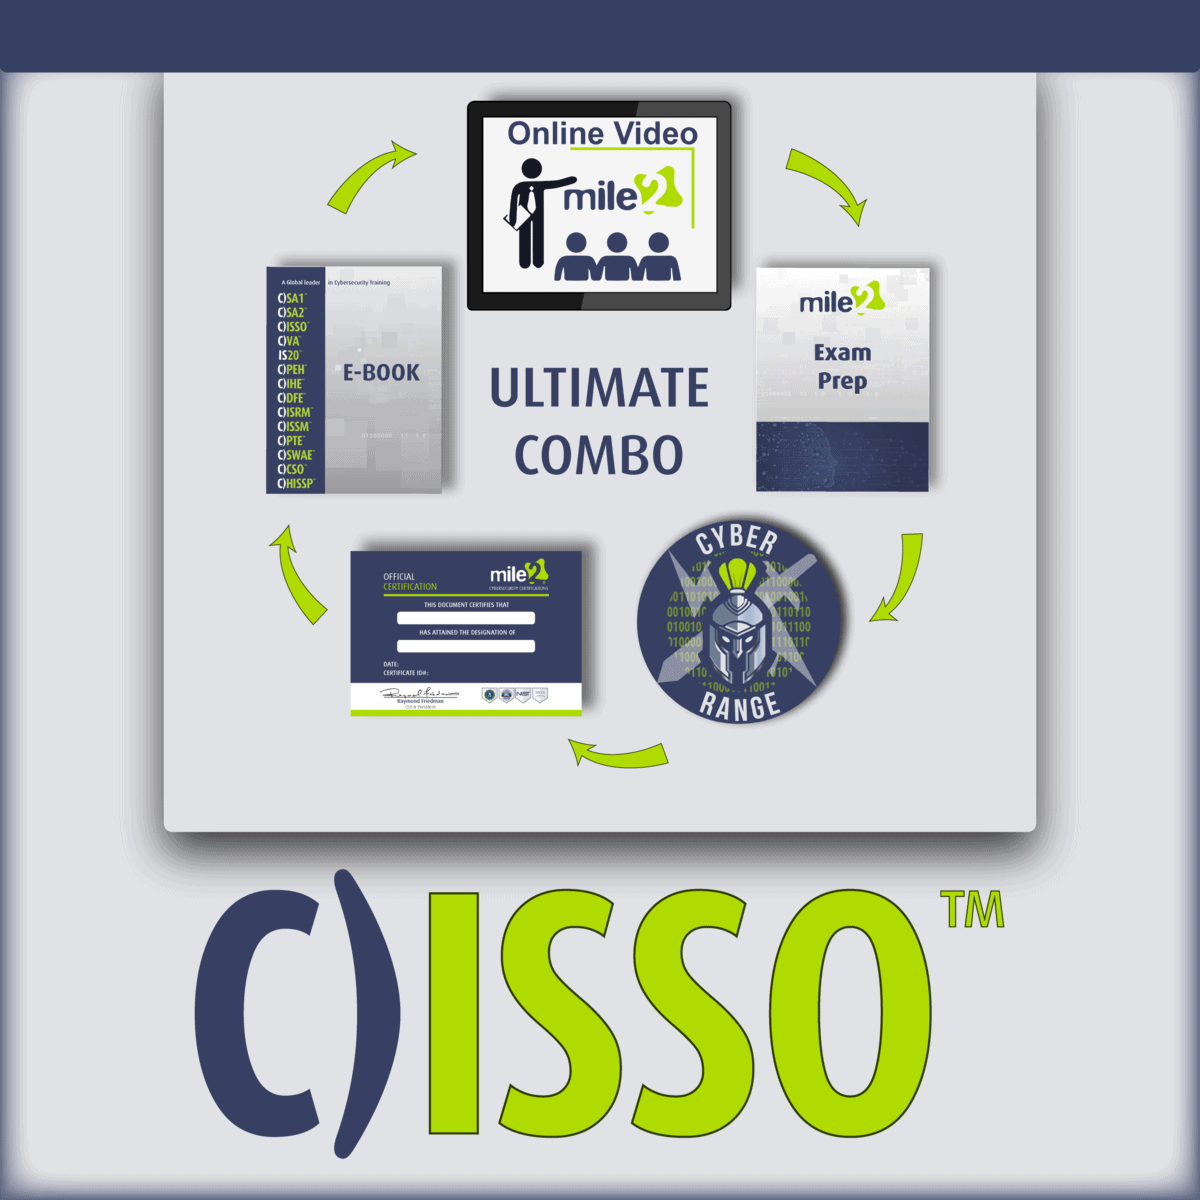 C)ISSO Information Systems Security Officer ultimate combo